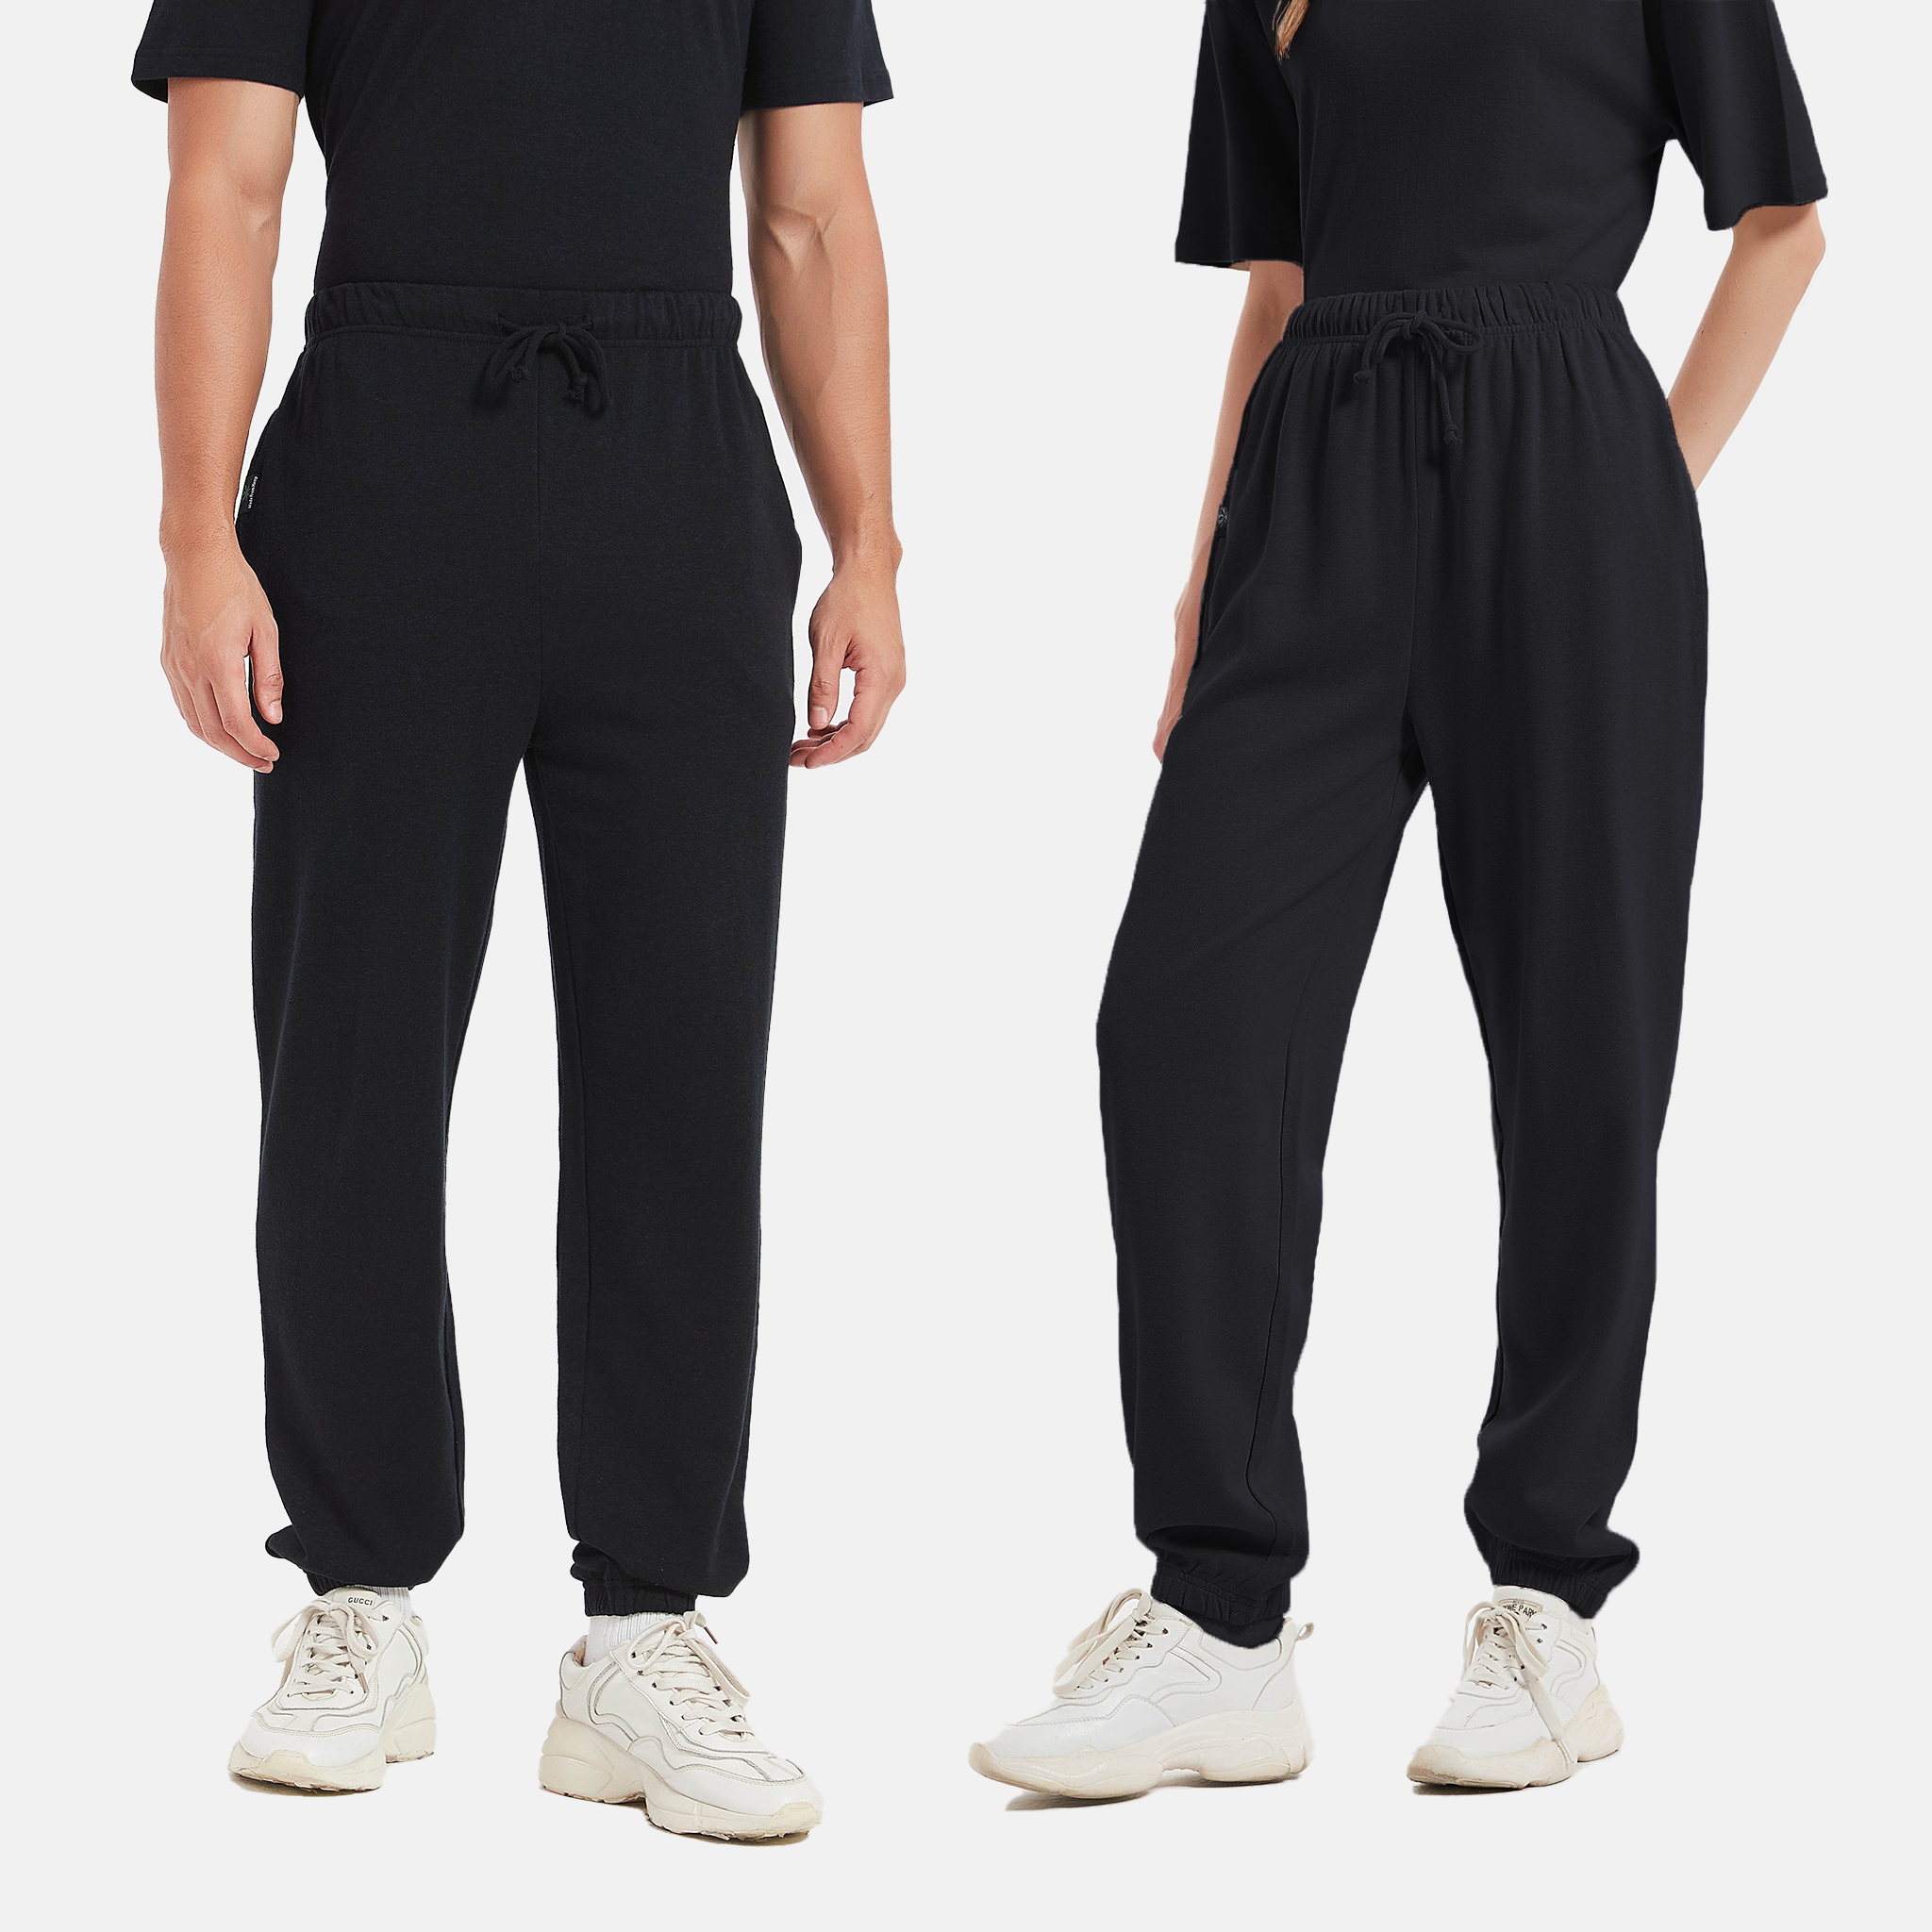 Organic Cotton Black Sweatpants, Eco-Friendly, Sustainable, and Comfortable Lounge Wear for Men and Women